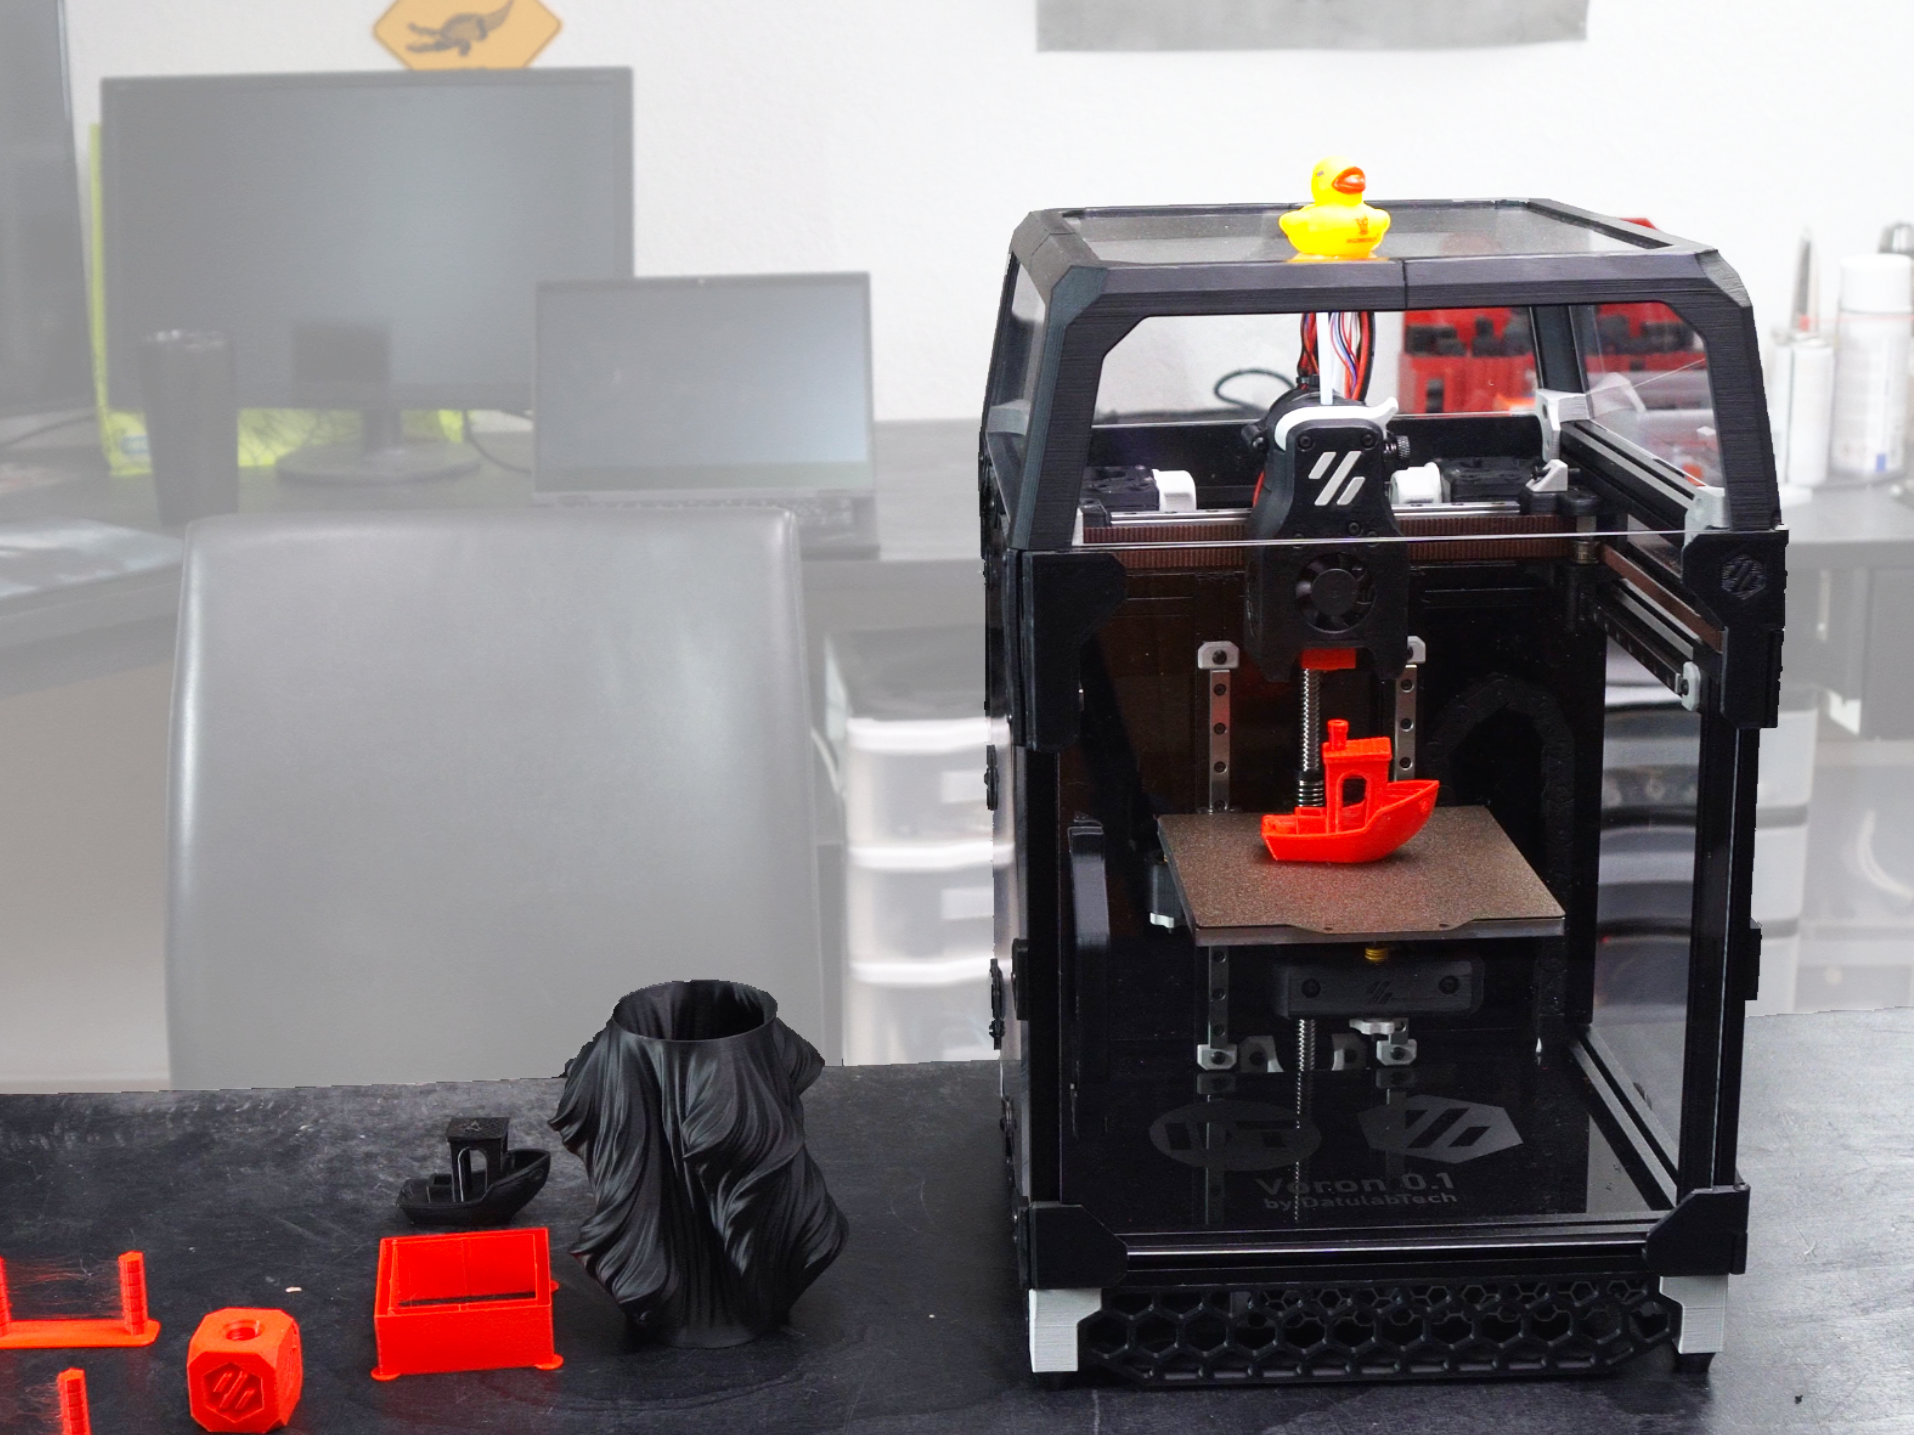 How to build you own 3D printer